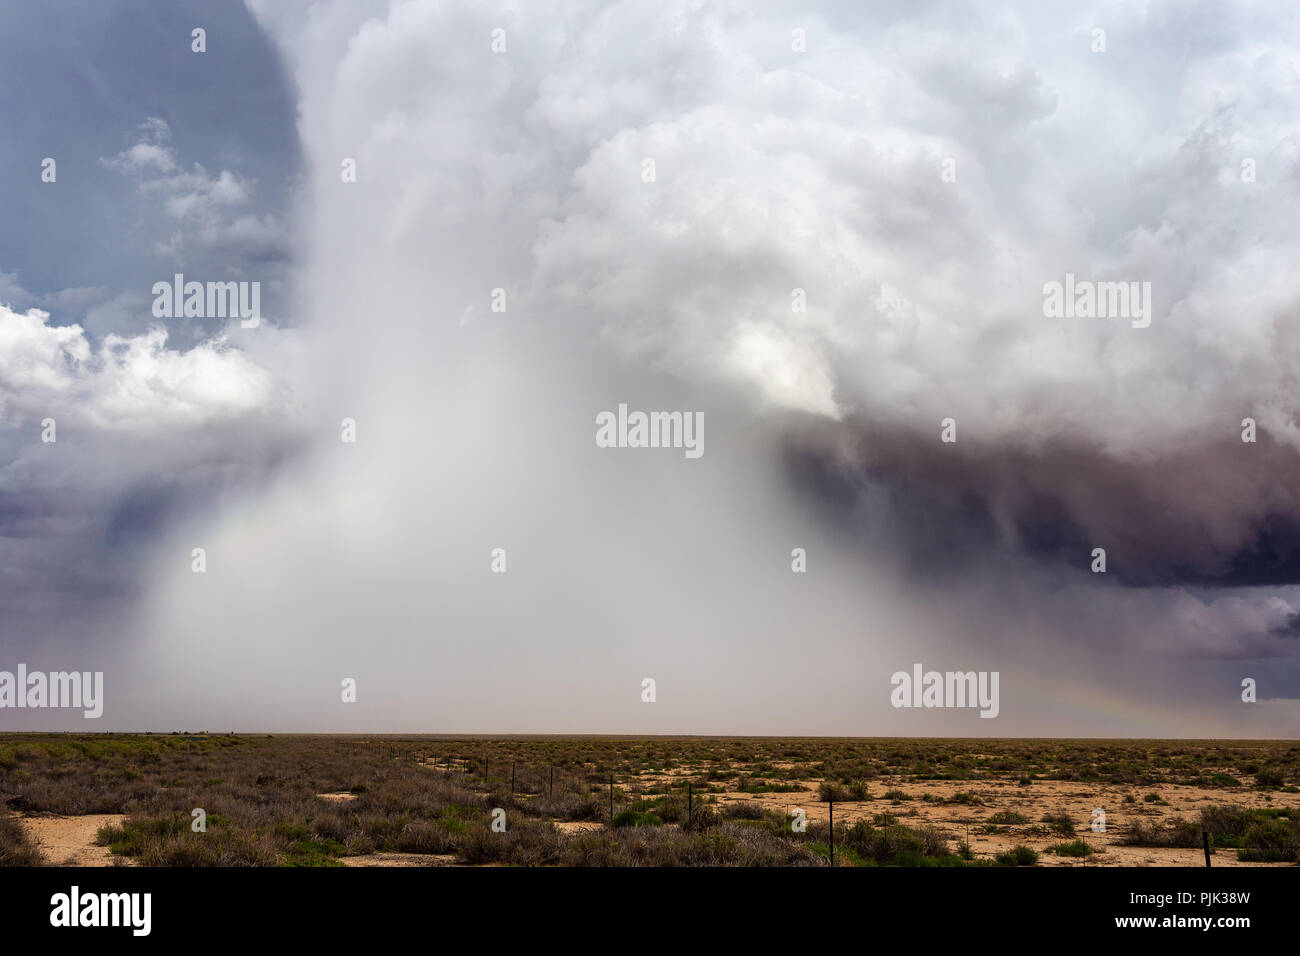 Microburst of hail and rain falling from a supercell thunderstorm cloud in Arizona Stock Photo